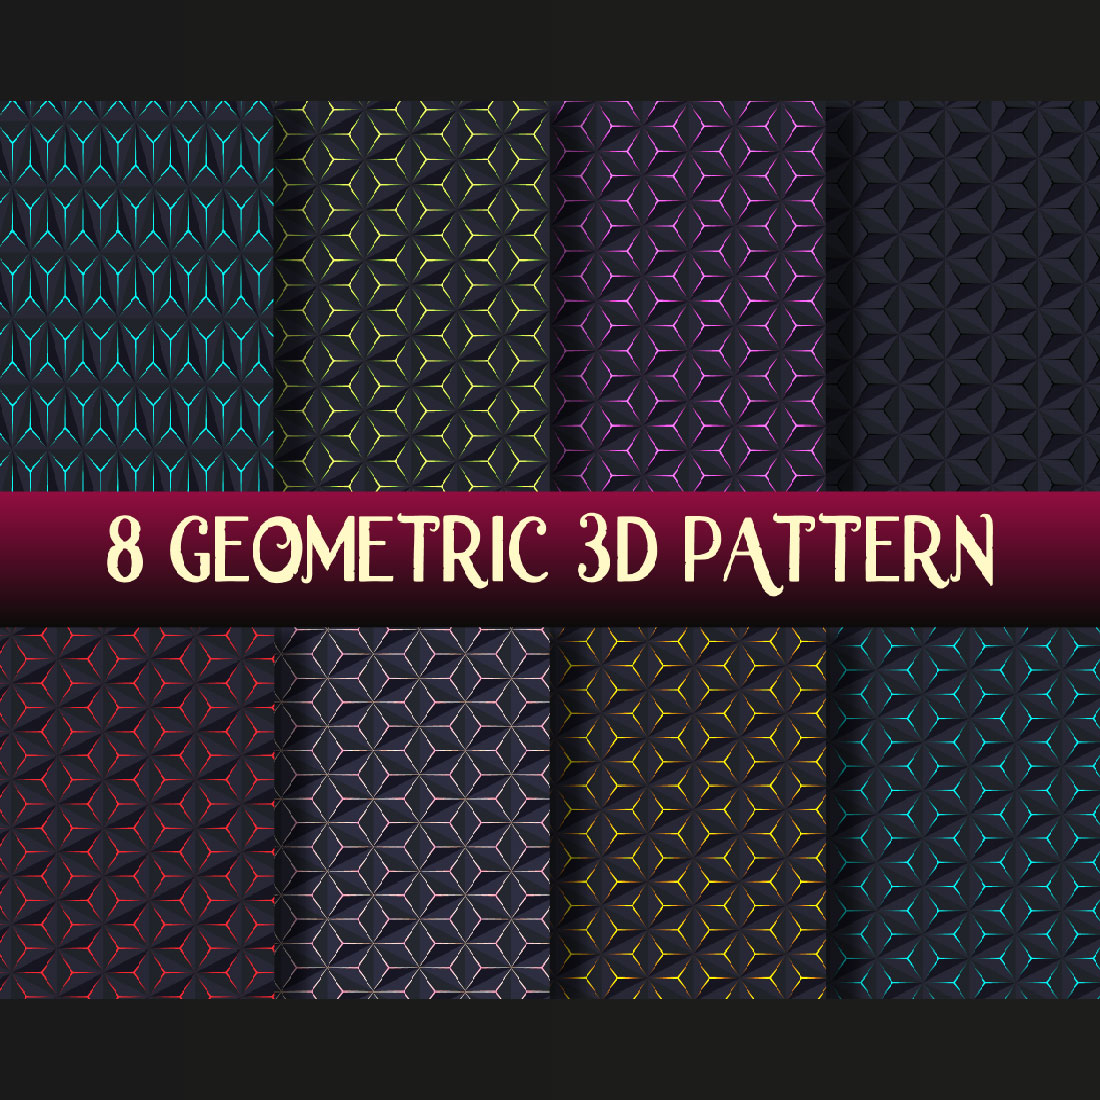 Geometric 3D Seamless Patterns cover image.